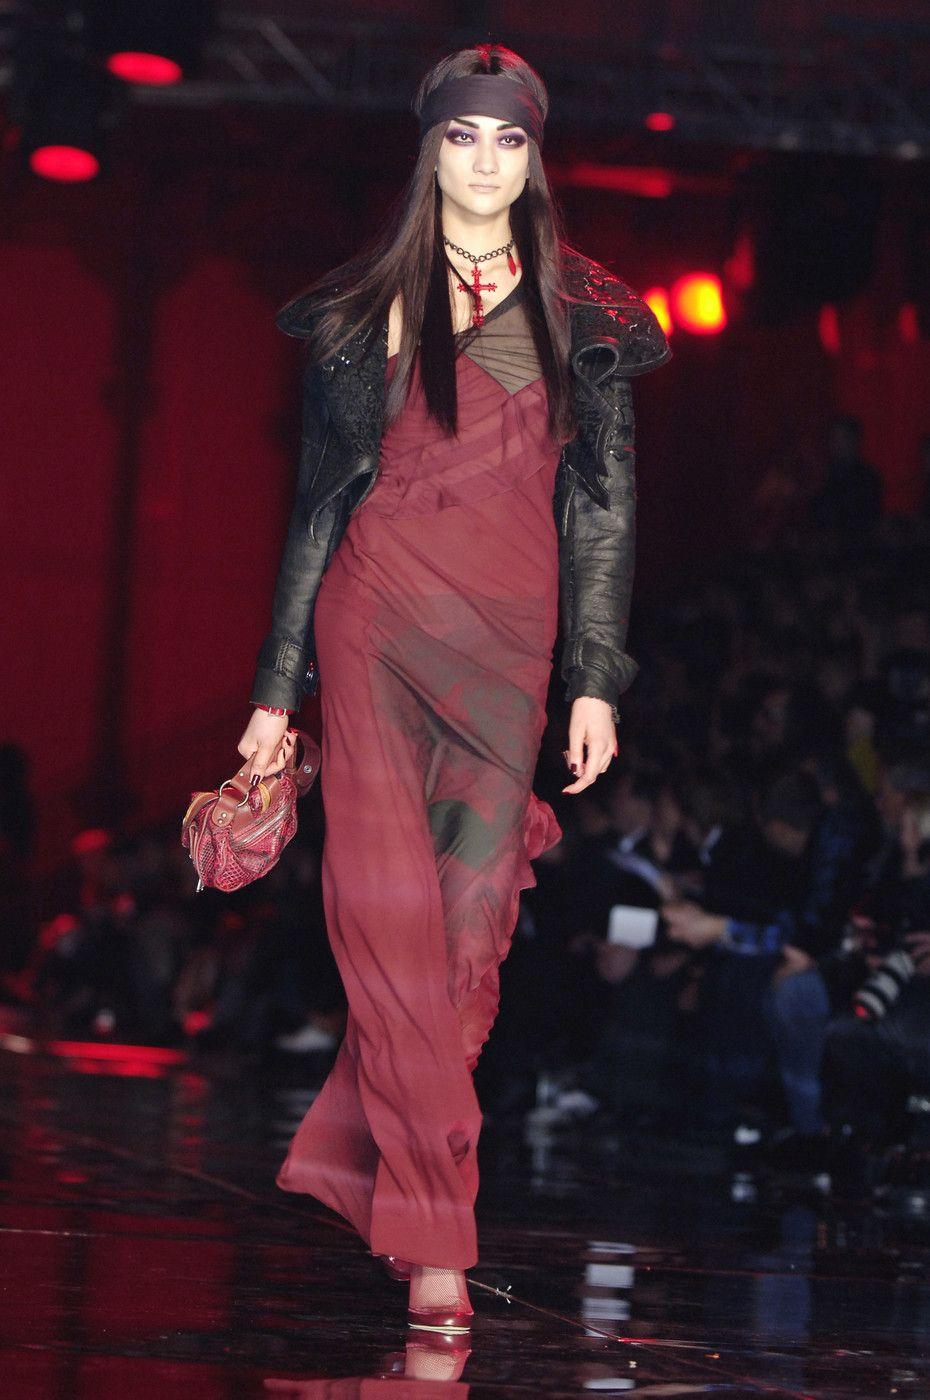 Breathtaking Christian Dior beaded floral burgundy silk chiffon bias-cut gown. Dior is probably the best known name in high fashion since the late 1940's. This stunning Christian Dior gown from John Galliano's iconic 2006 fall-winter collection is a